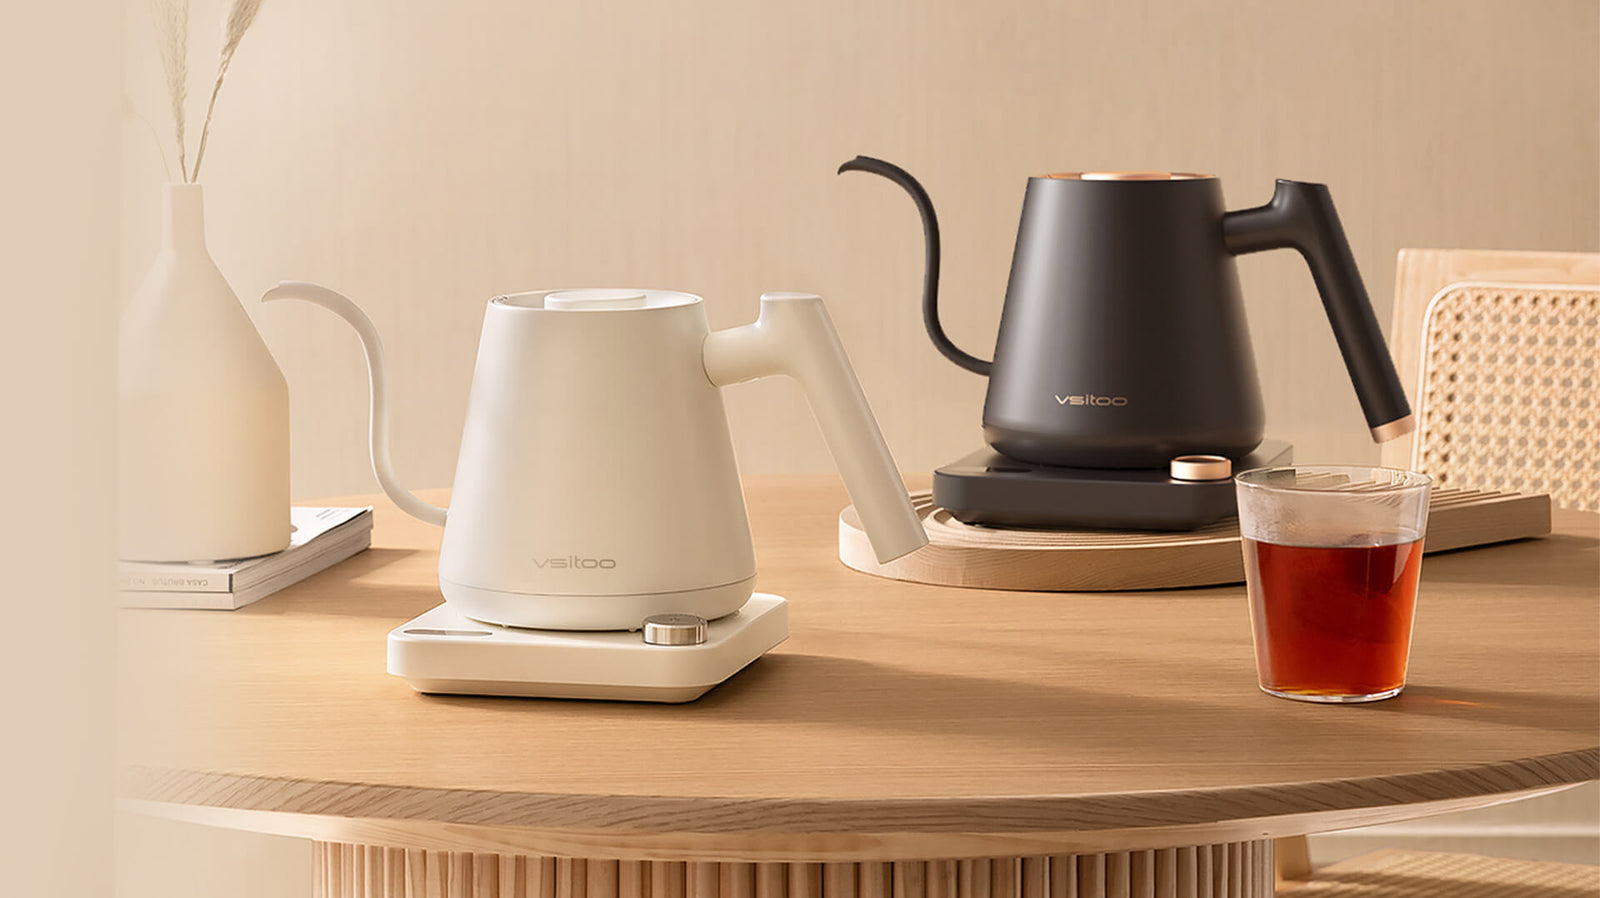 VSITOO SMART ELECTRIC COFFEE KETTLES